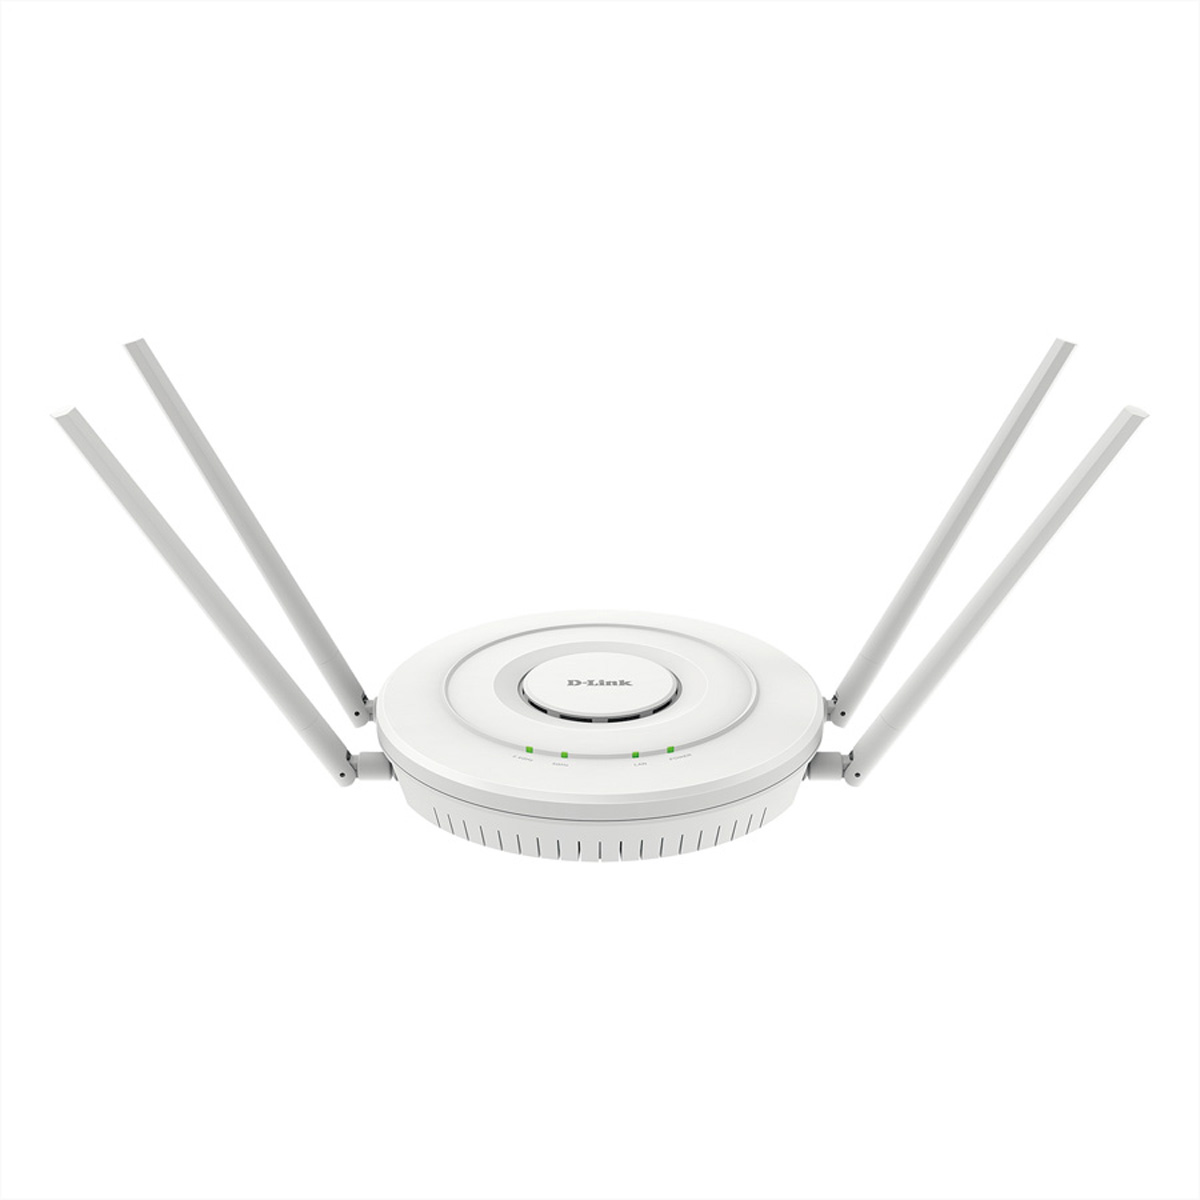 DWL-6610APE AC1200 Point Dualband 1,2 Gbit/s Points D-LINK mit Access WLAN Access Unified Antennen ext.